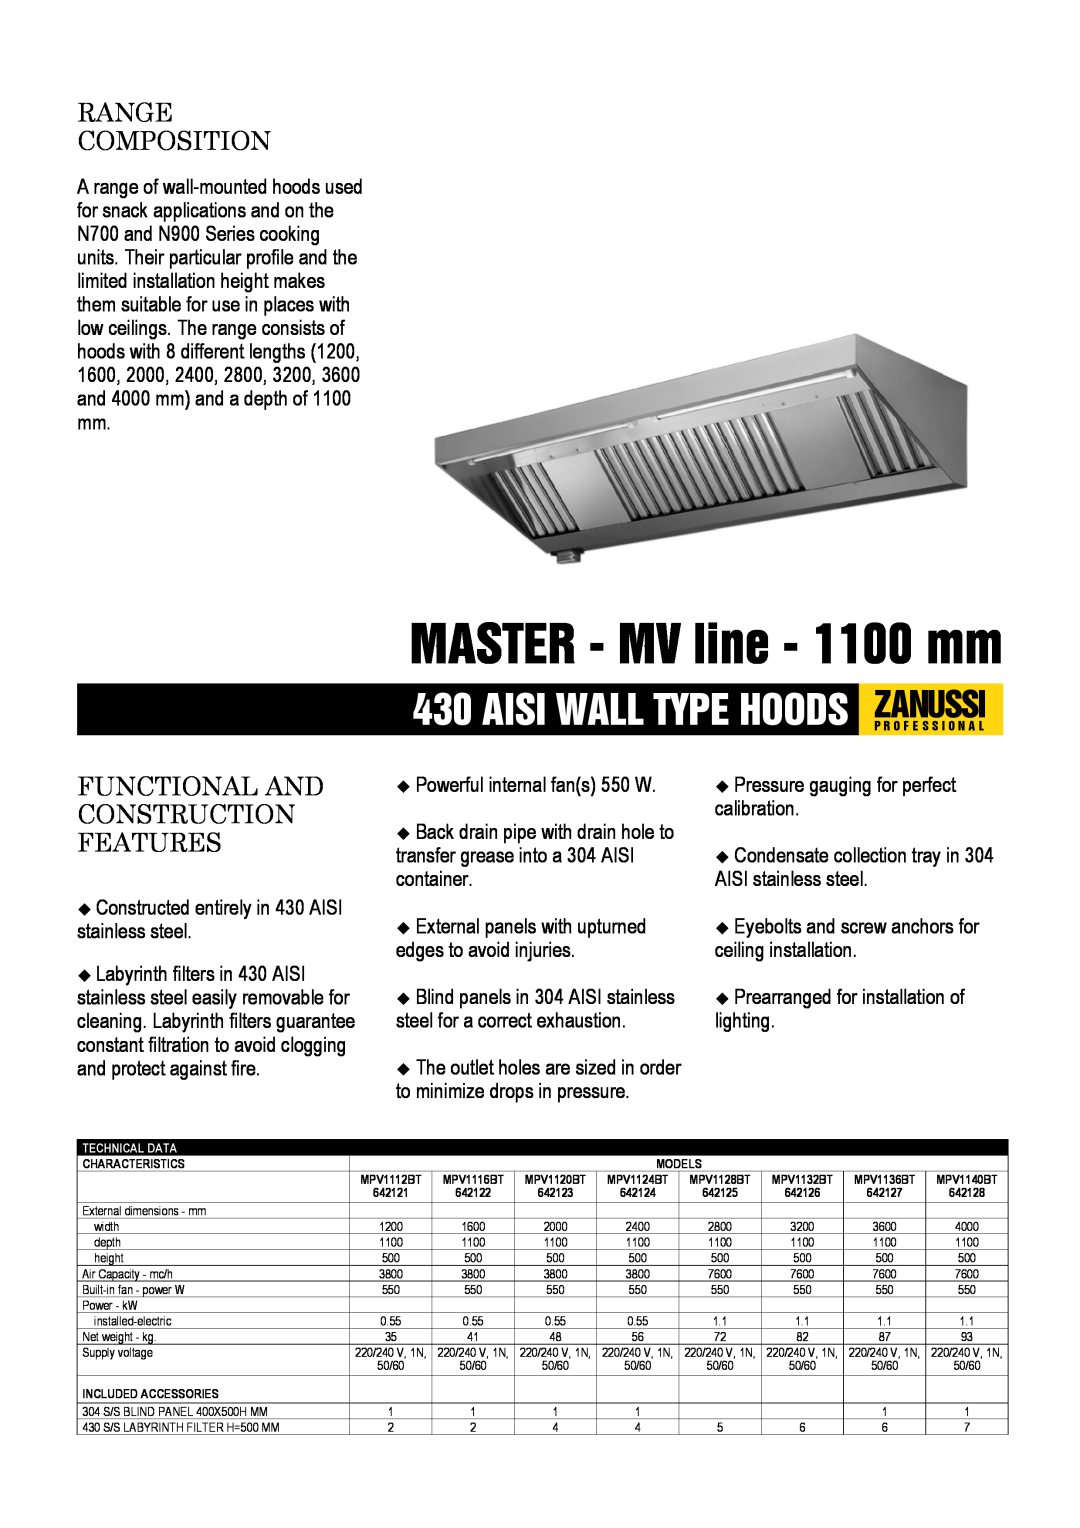 Zanussi 642124, 642121 dimensions MASTER - MV line - 1100 mm, Range Composition, Functional And Construction Features 